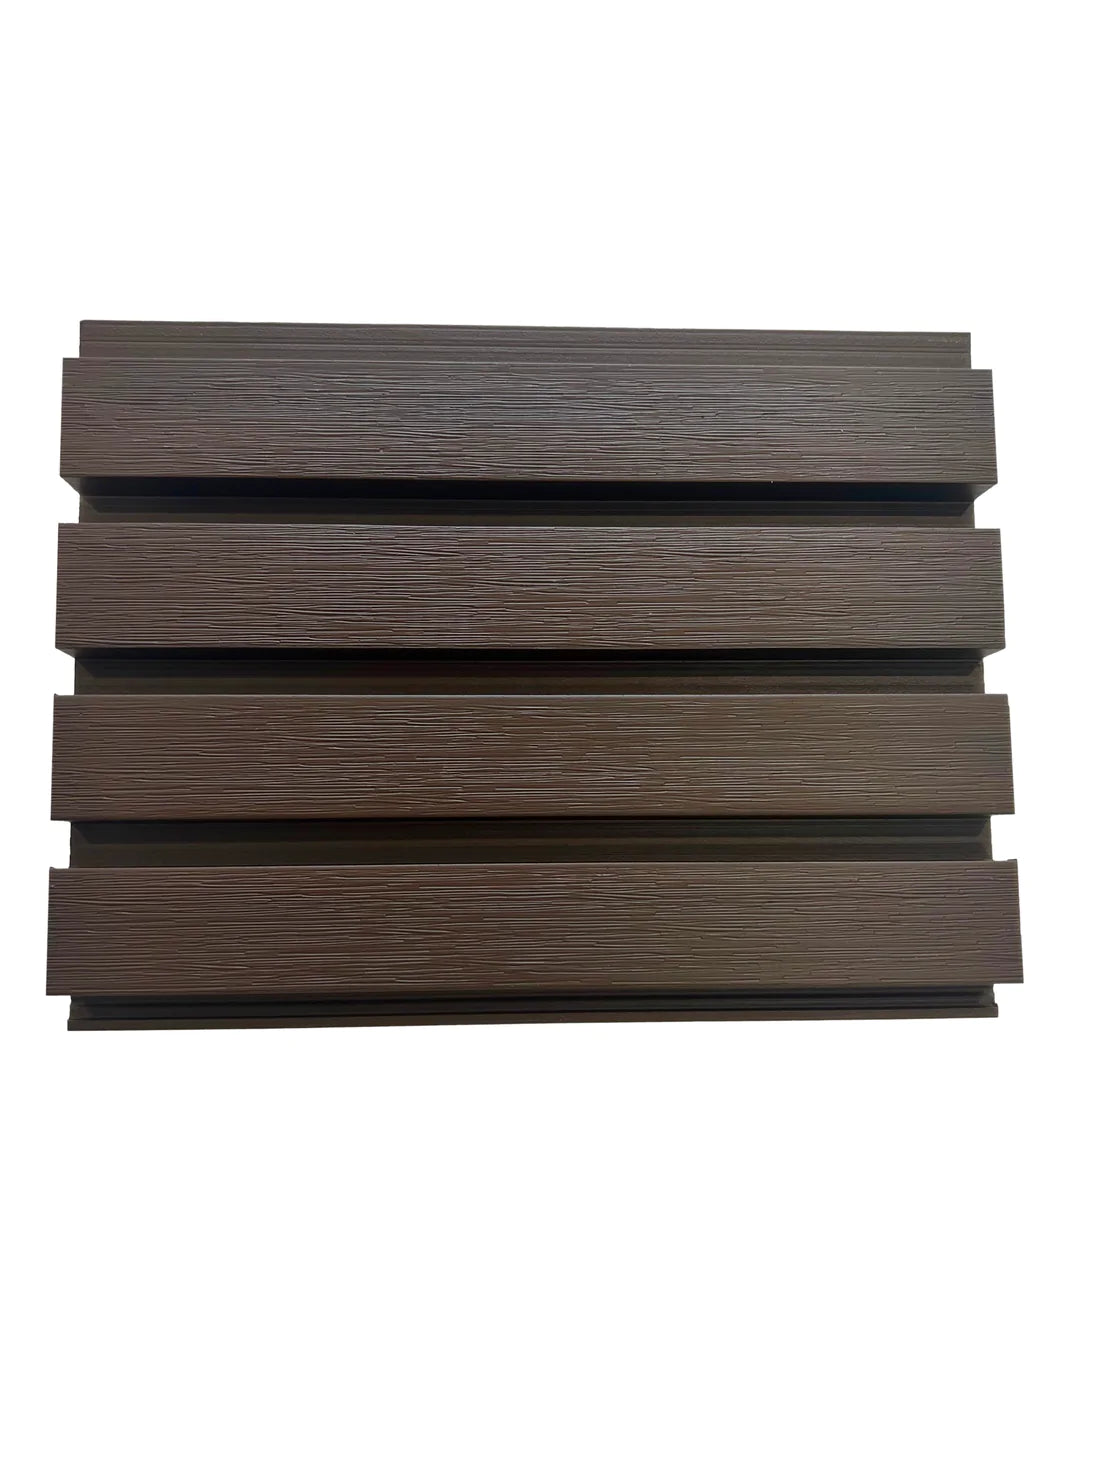 Composite Slatted Cladding – Red Brown - Series 1